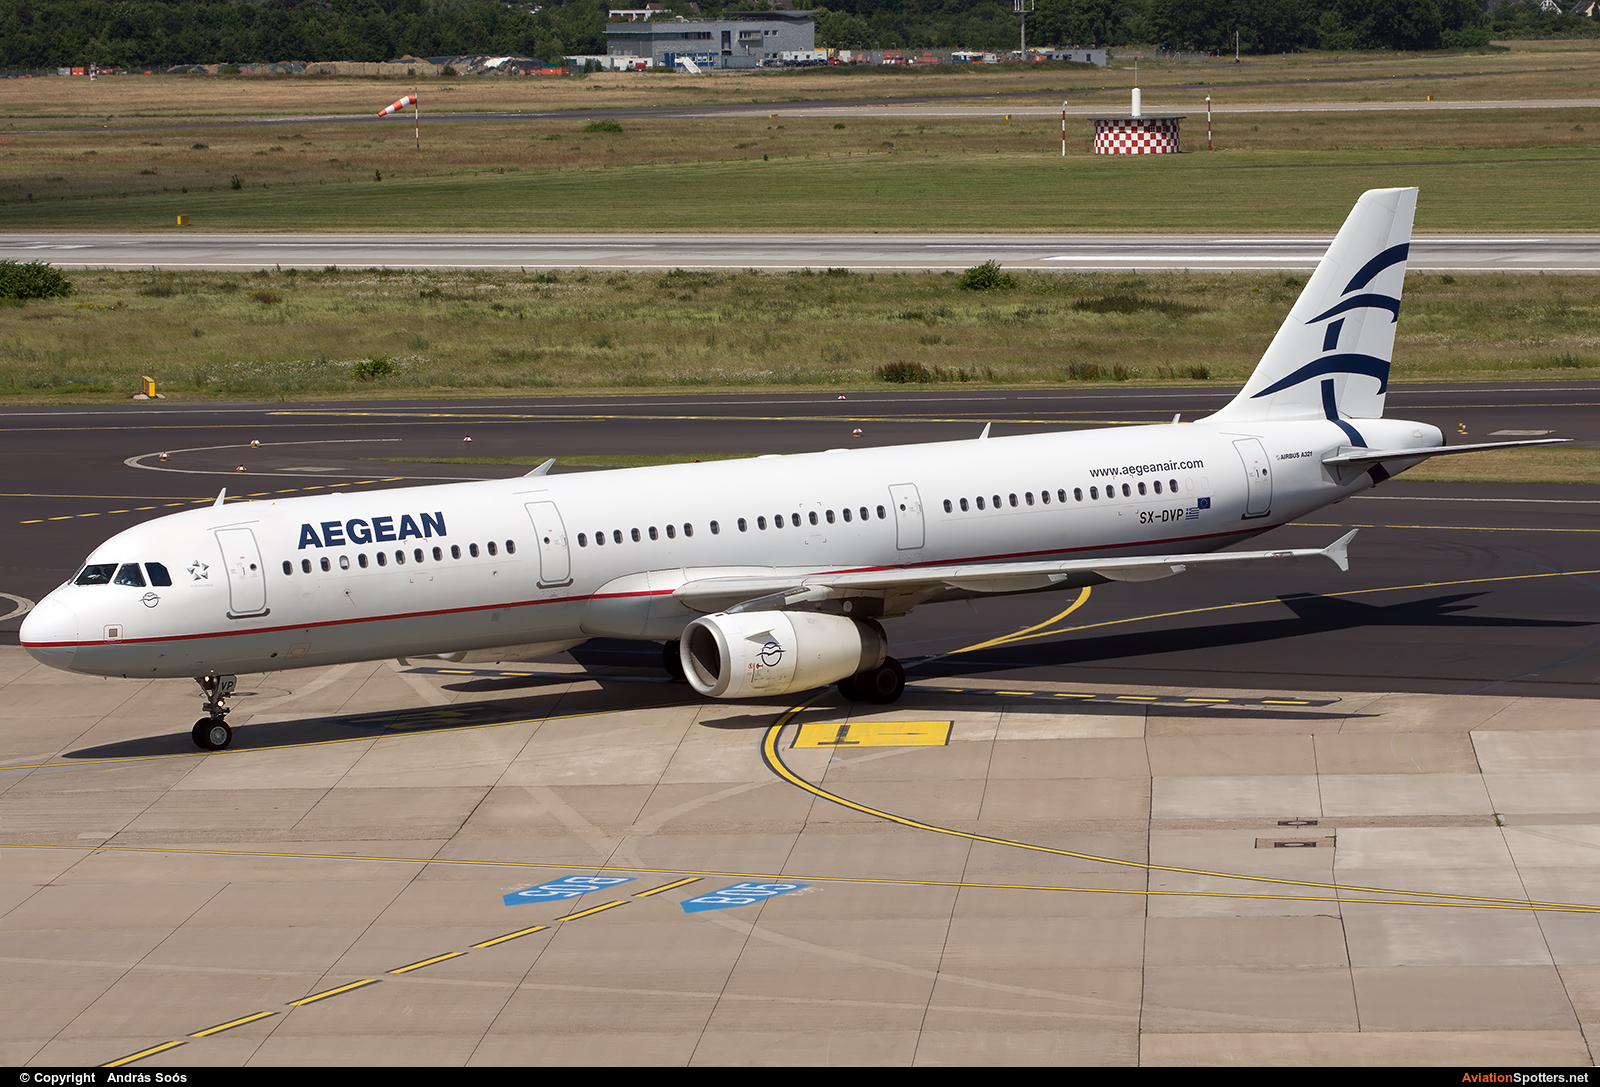 Aegean Airlines  -  A321  (SX-DVP) By András Soós (sas1965)